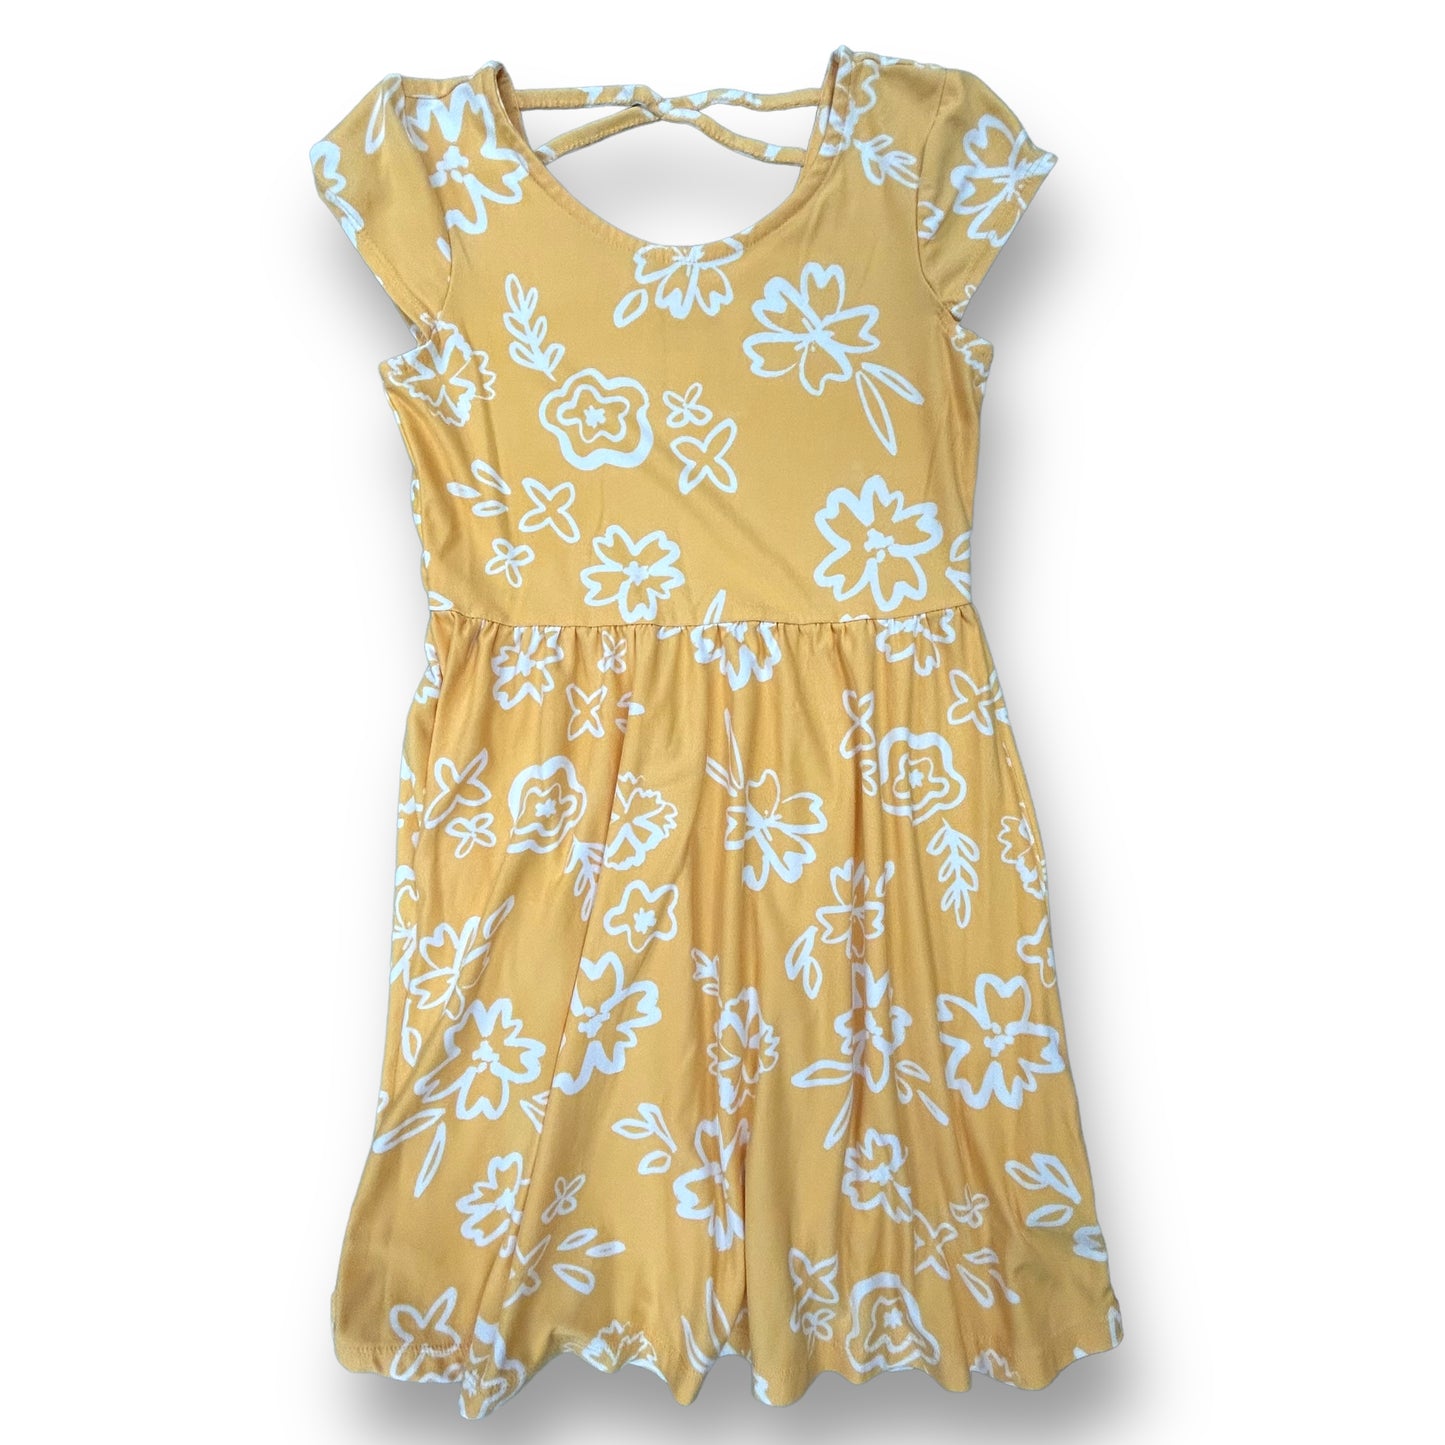 Girls Epic Threads Size M White & Yellow Floral Soft Short Sleeve Dress